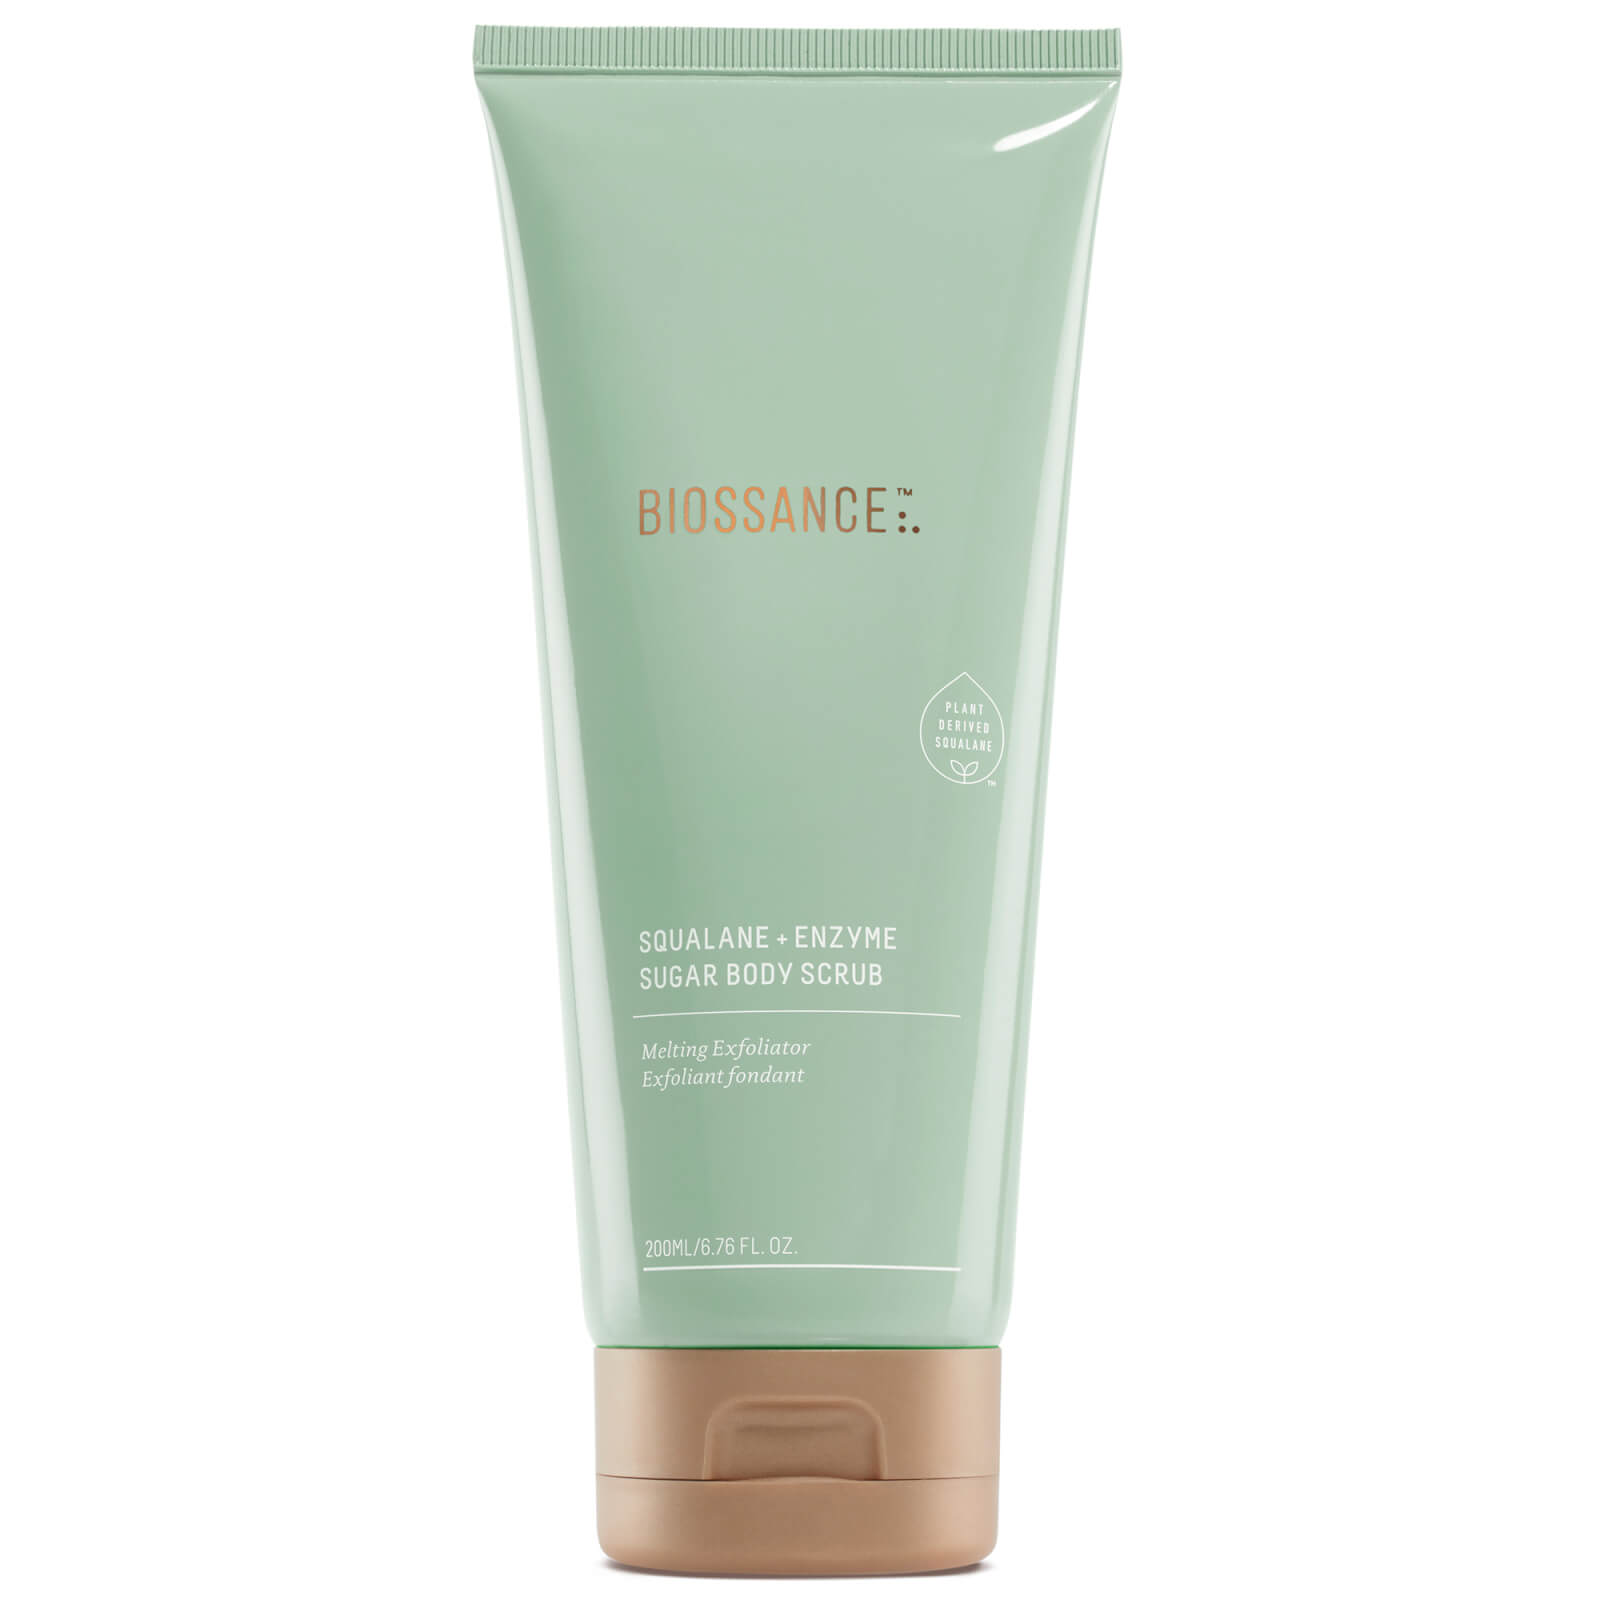 Photos - Facial / Body Cleansing Product Biossance Squalane and Enzyme Sugar Body Scrub 200ml